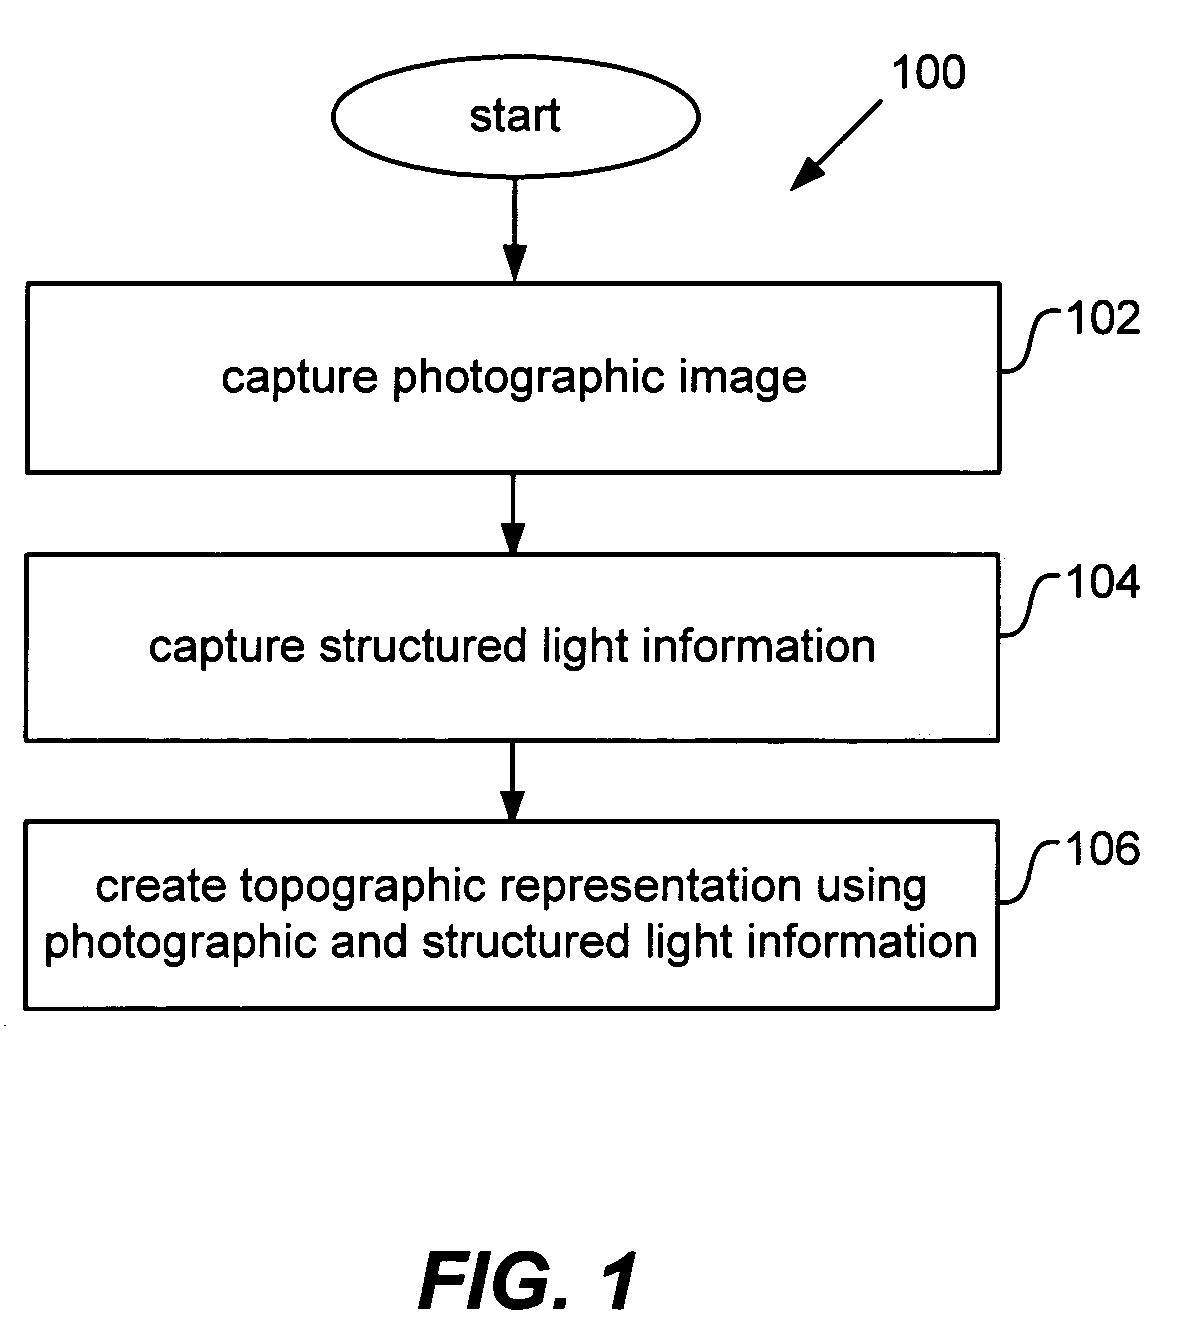 Surface construction using combined photographic and structured light information